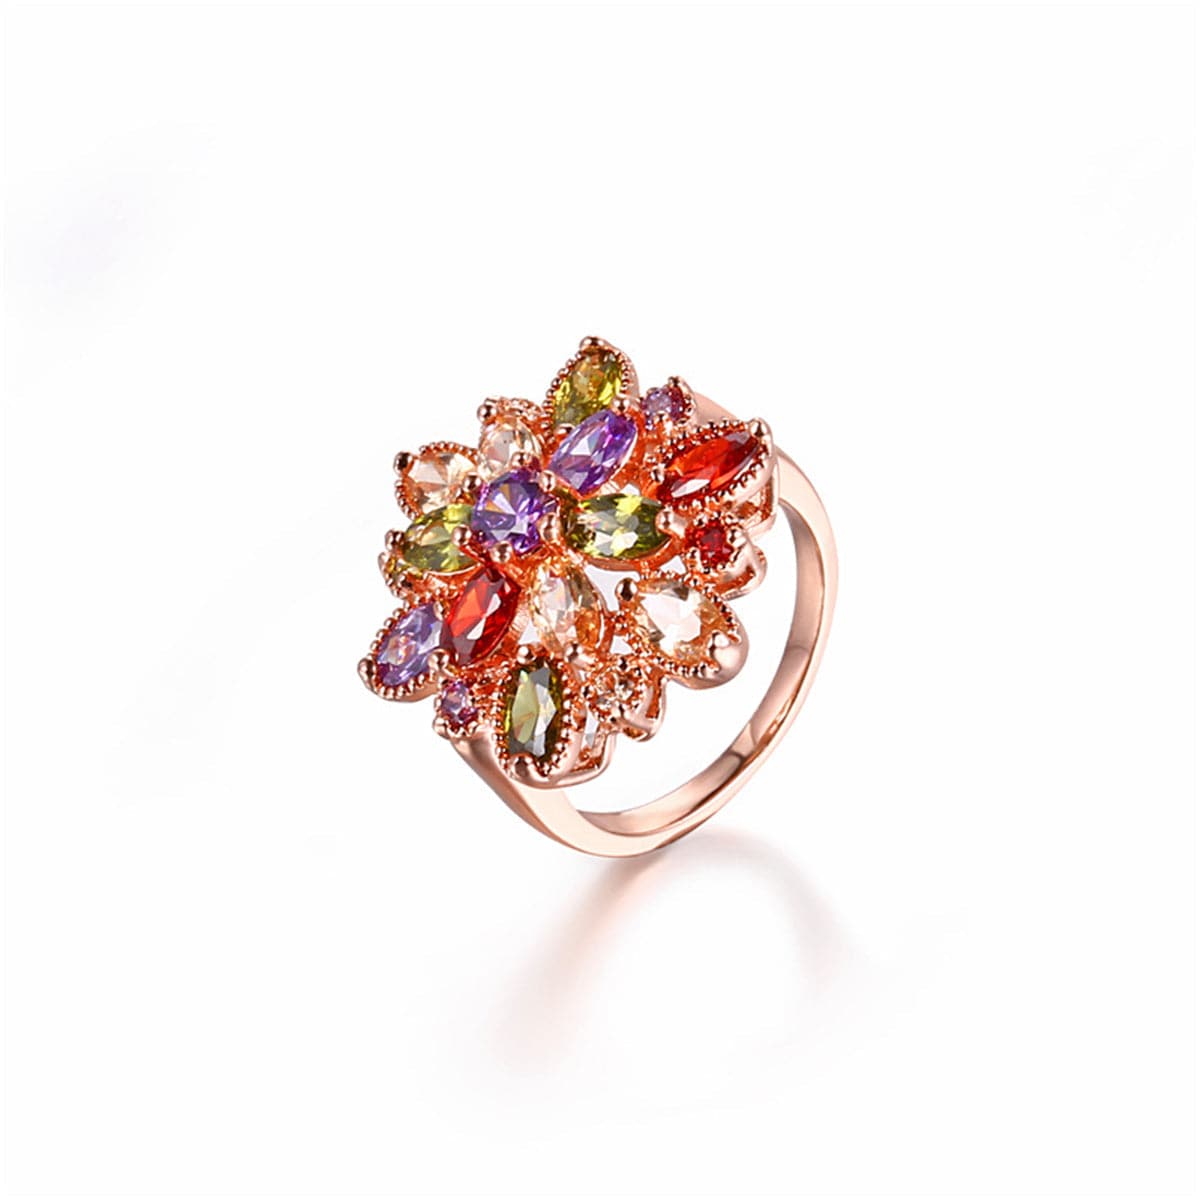 Red Crystal & 18K Rose Gold-Plated Flower Band Ring